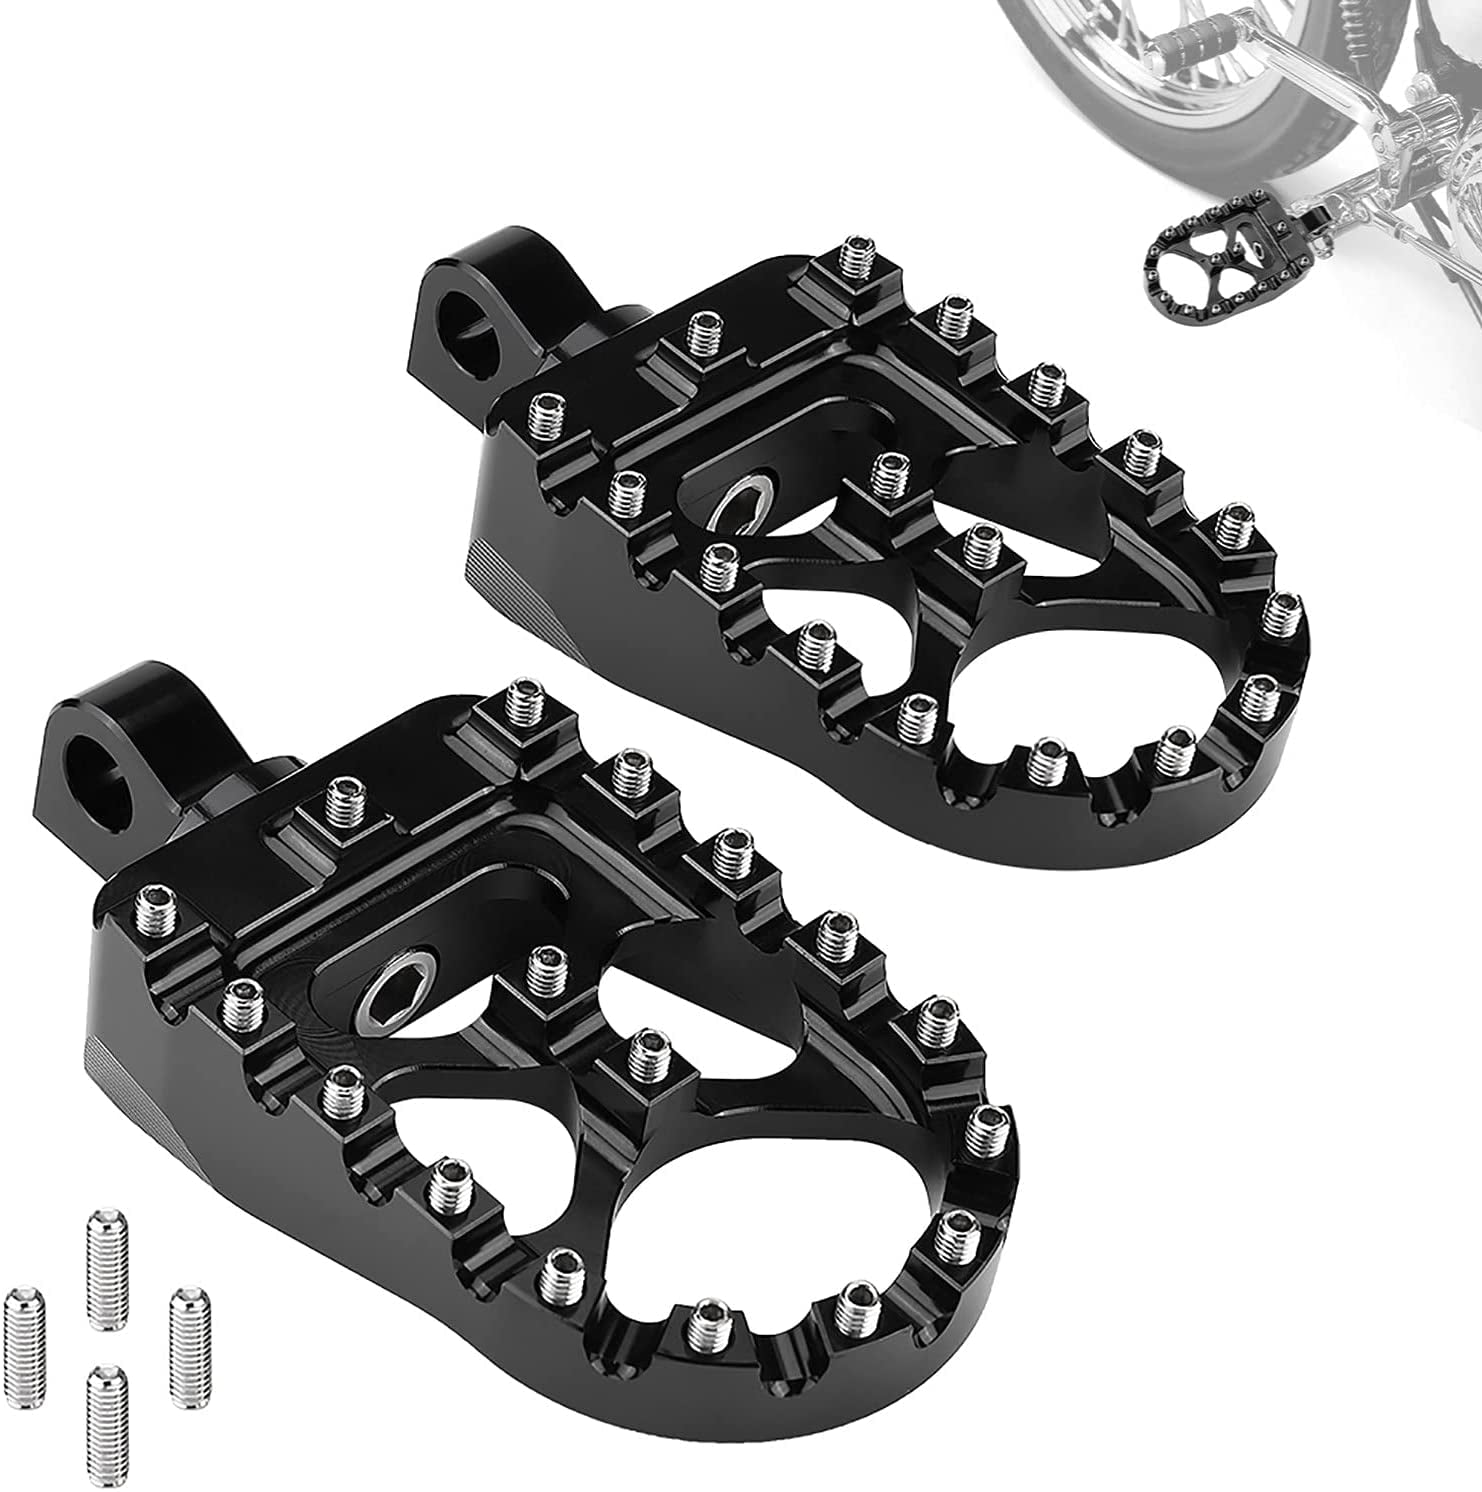 Black CNC Wide Fat Footpegs for Harley Dyna Sportster Fatboy Iron 883 360 Dgree Rotating MX Chopper Bobber Style Motorcycle Wide Foot Pegs 